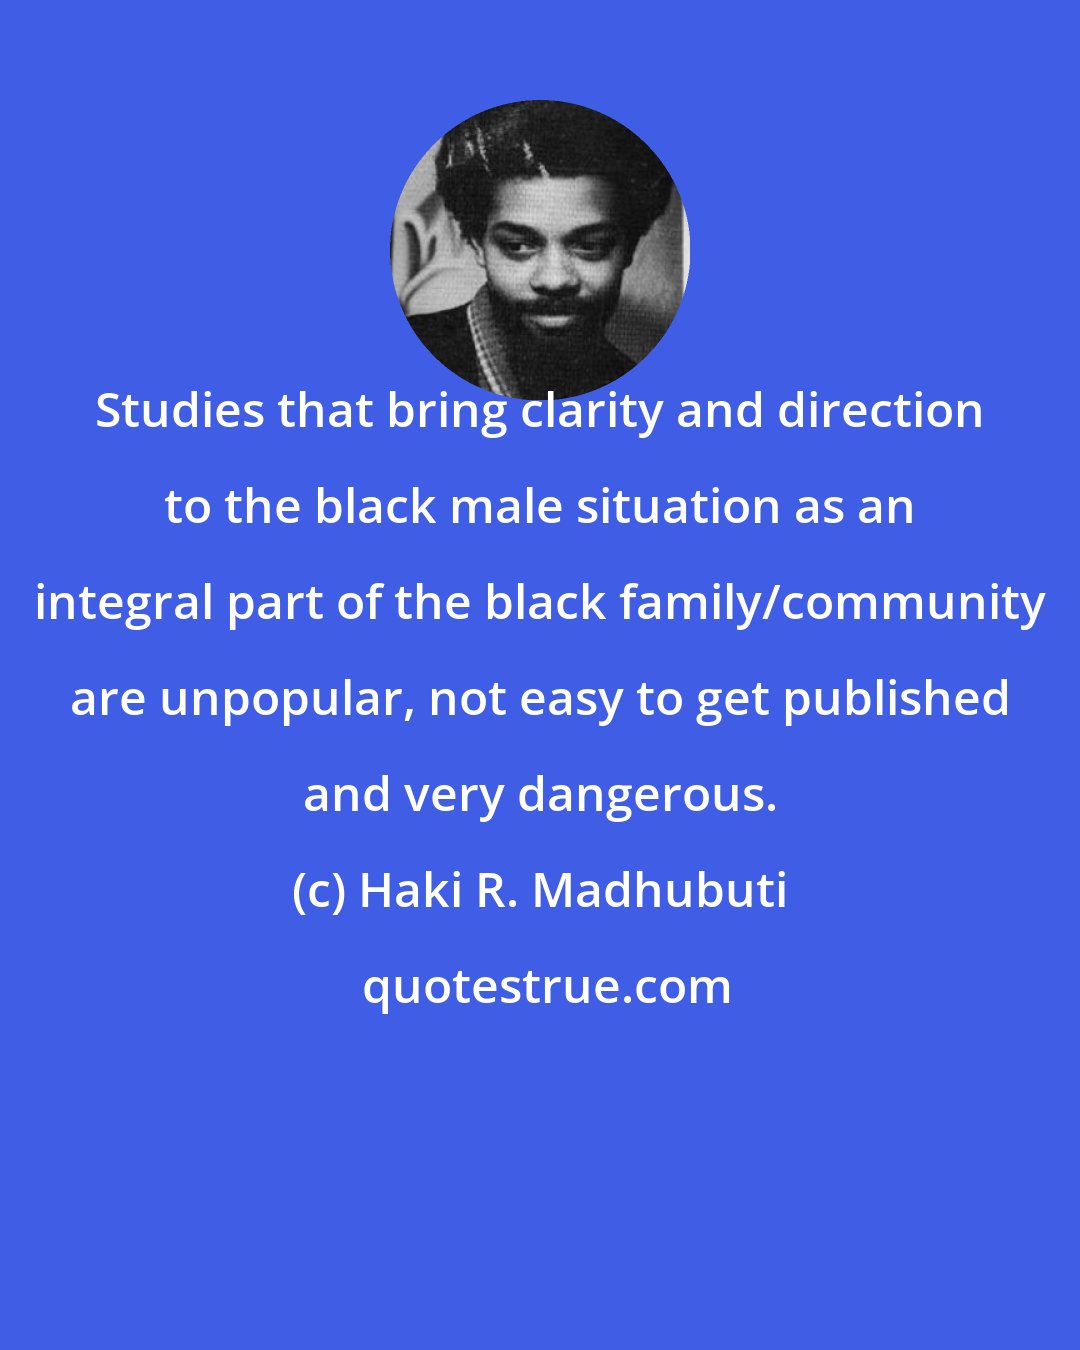 Haki R. Madhubuti: Studies that bring clarity and direction to the black male situation as an integral part of the black family/community are unpopular, not easy to get published and very dangerous.